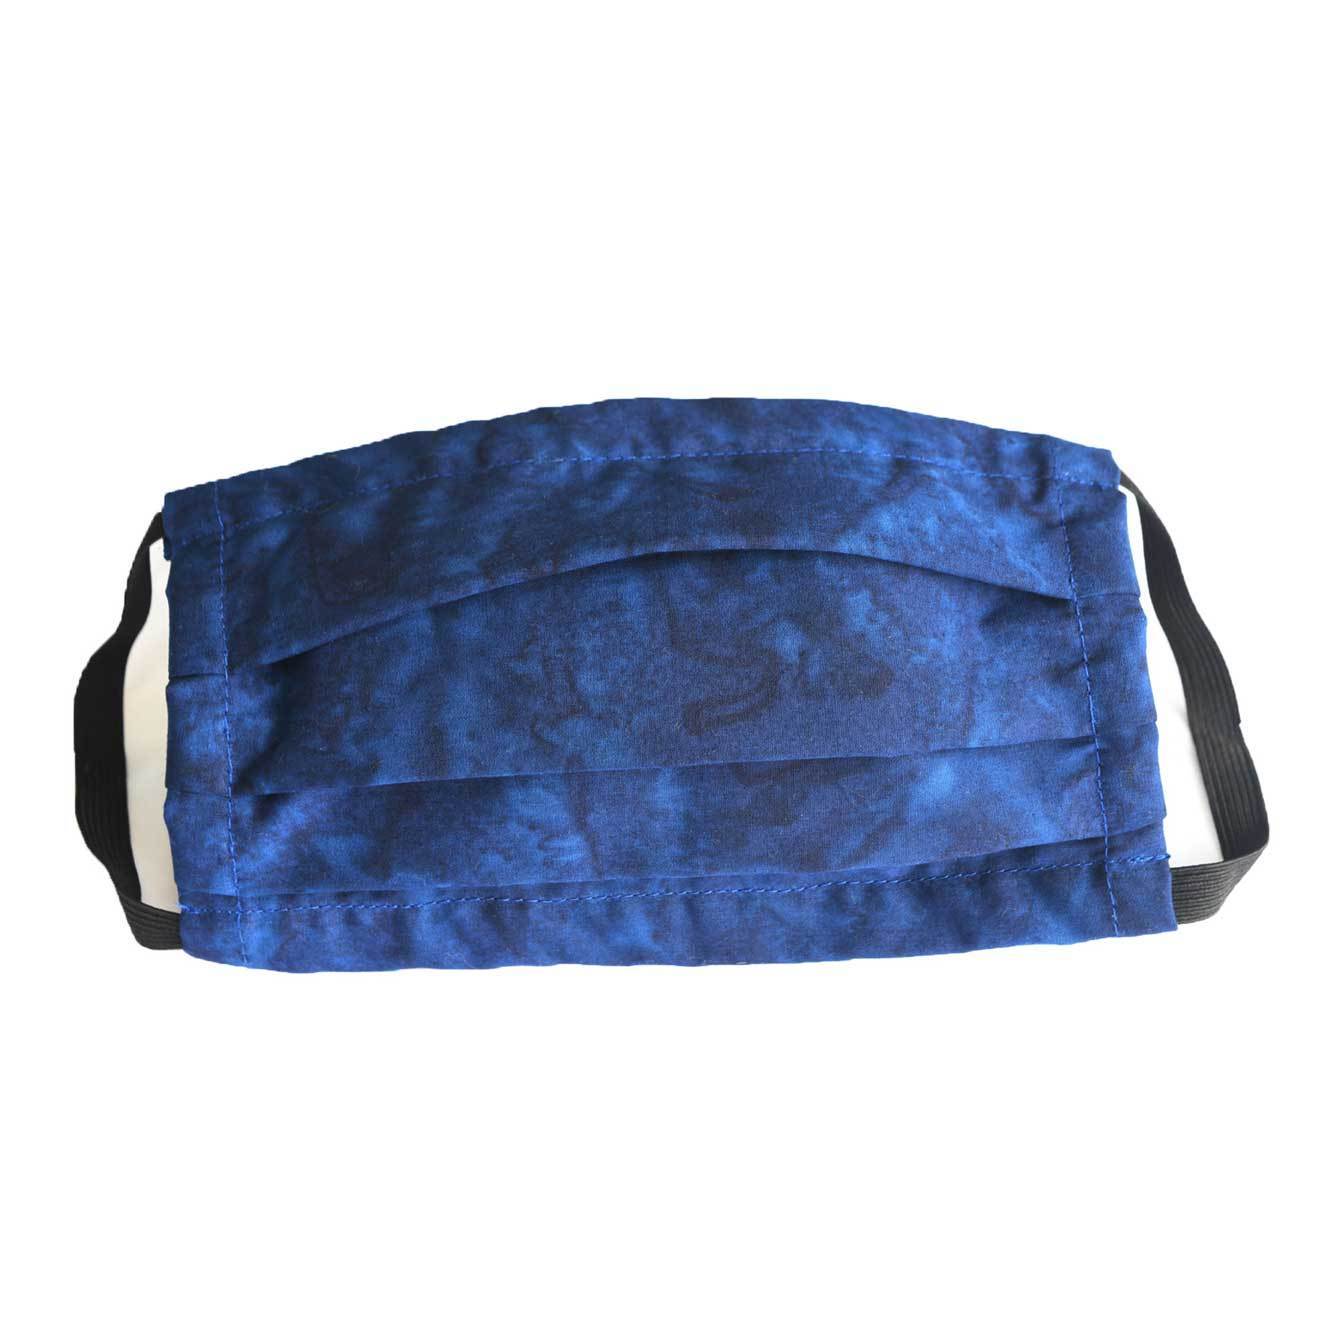 Mosaic Weighted Blankets accessories Washable Mask - Dark Blue